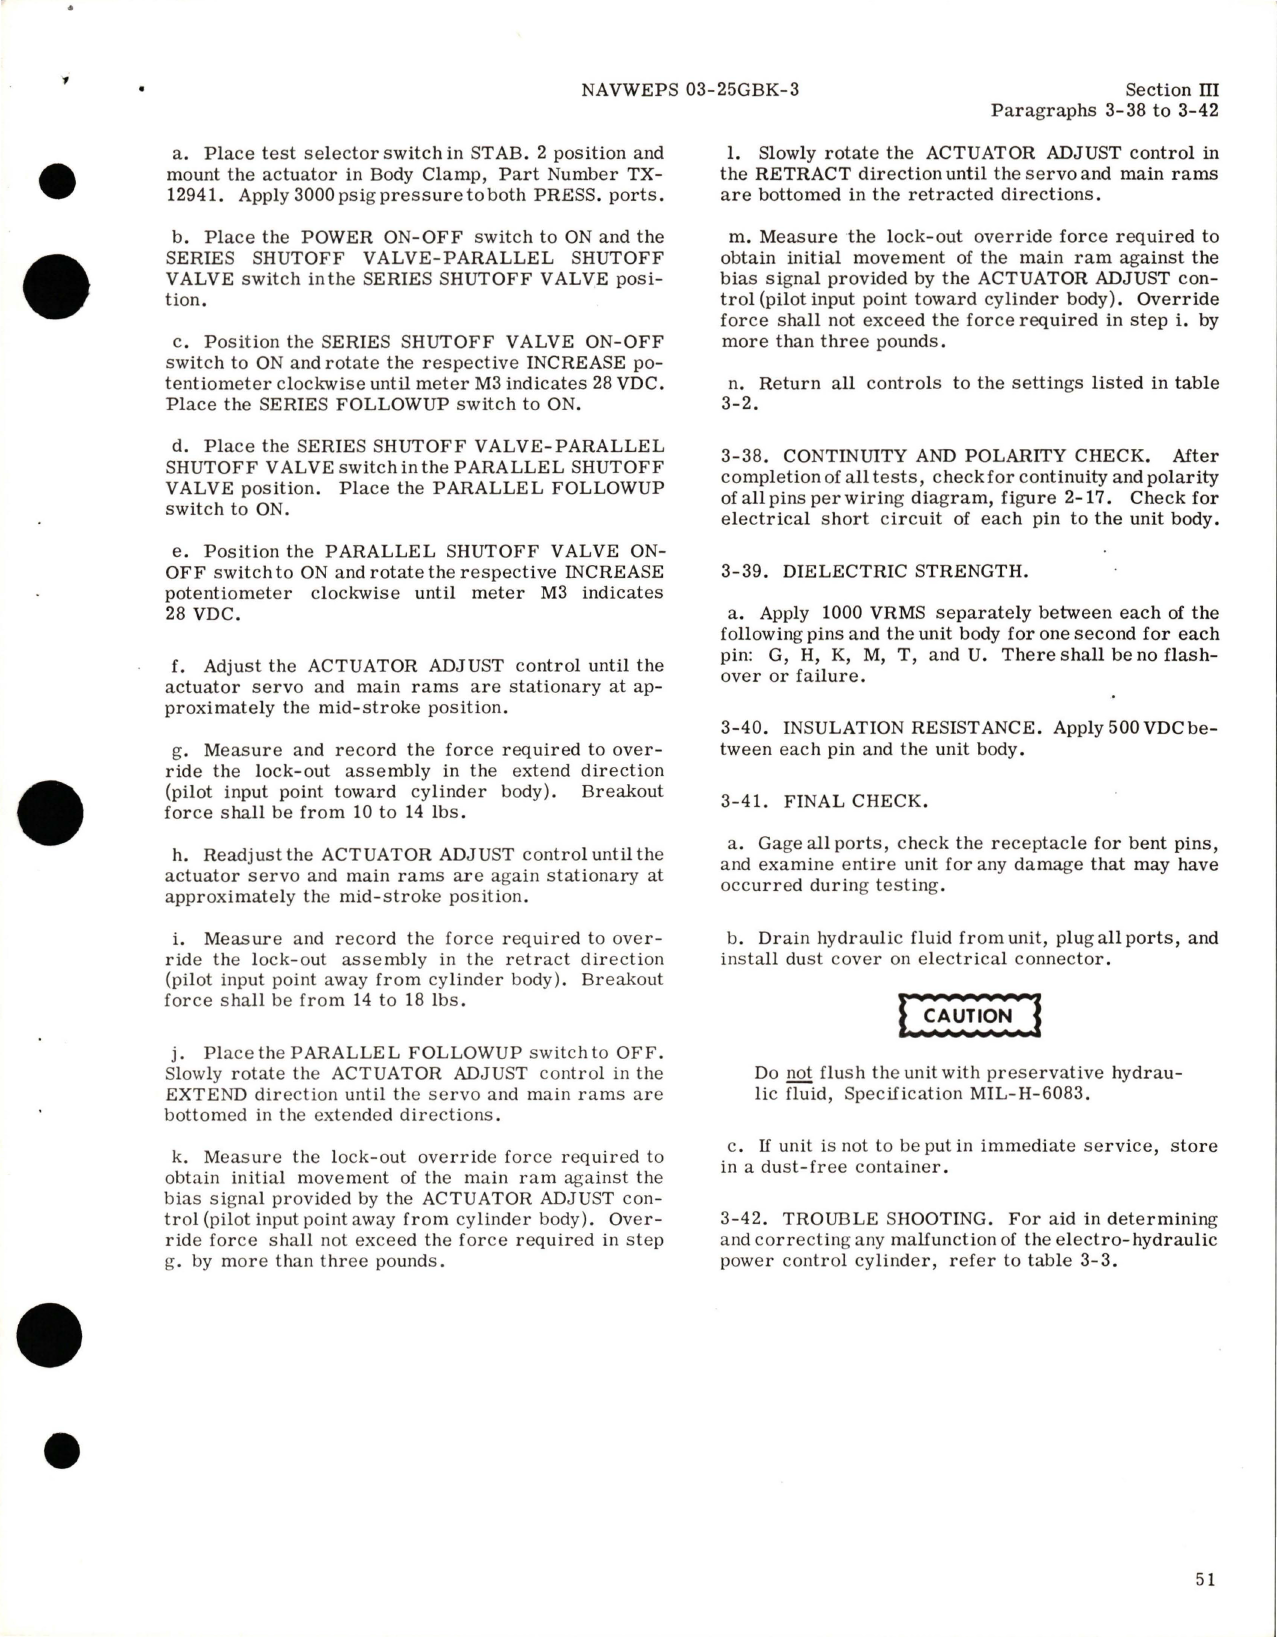 Sample page 7 from AirCorps Library document: Overhaul Instructions for Electro-Hydraulic Tandem Power Control Cylinder - Parts 16150-7, 16150-8, 16150-11, 16150-12, 16150-13, and 16150-14